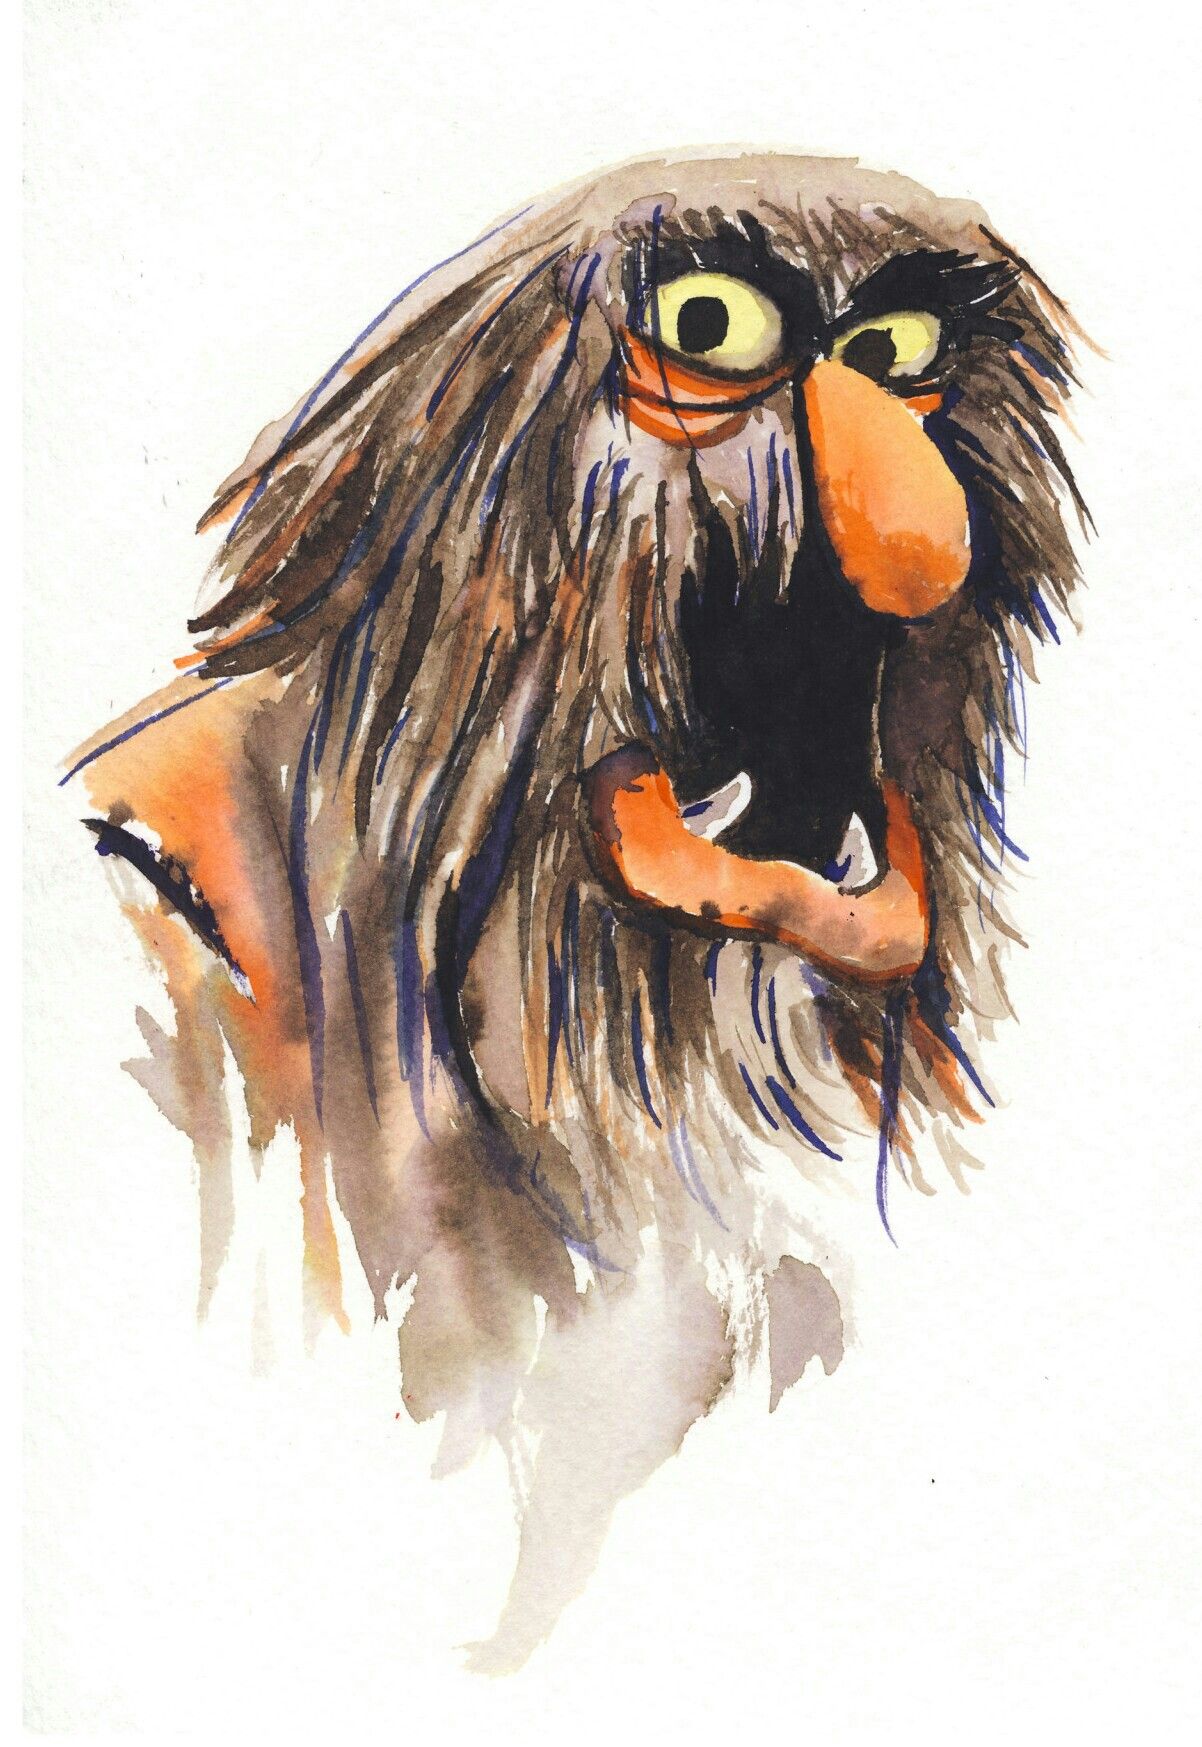 SWEETUMS. The muppet show, Muppets, Jim henson